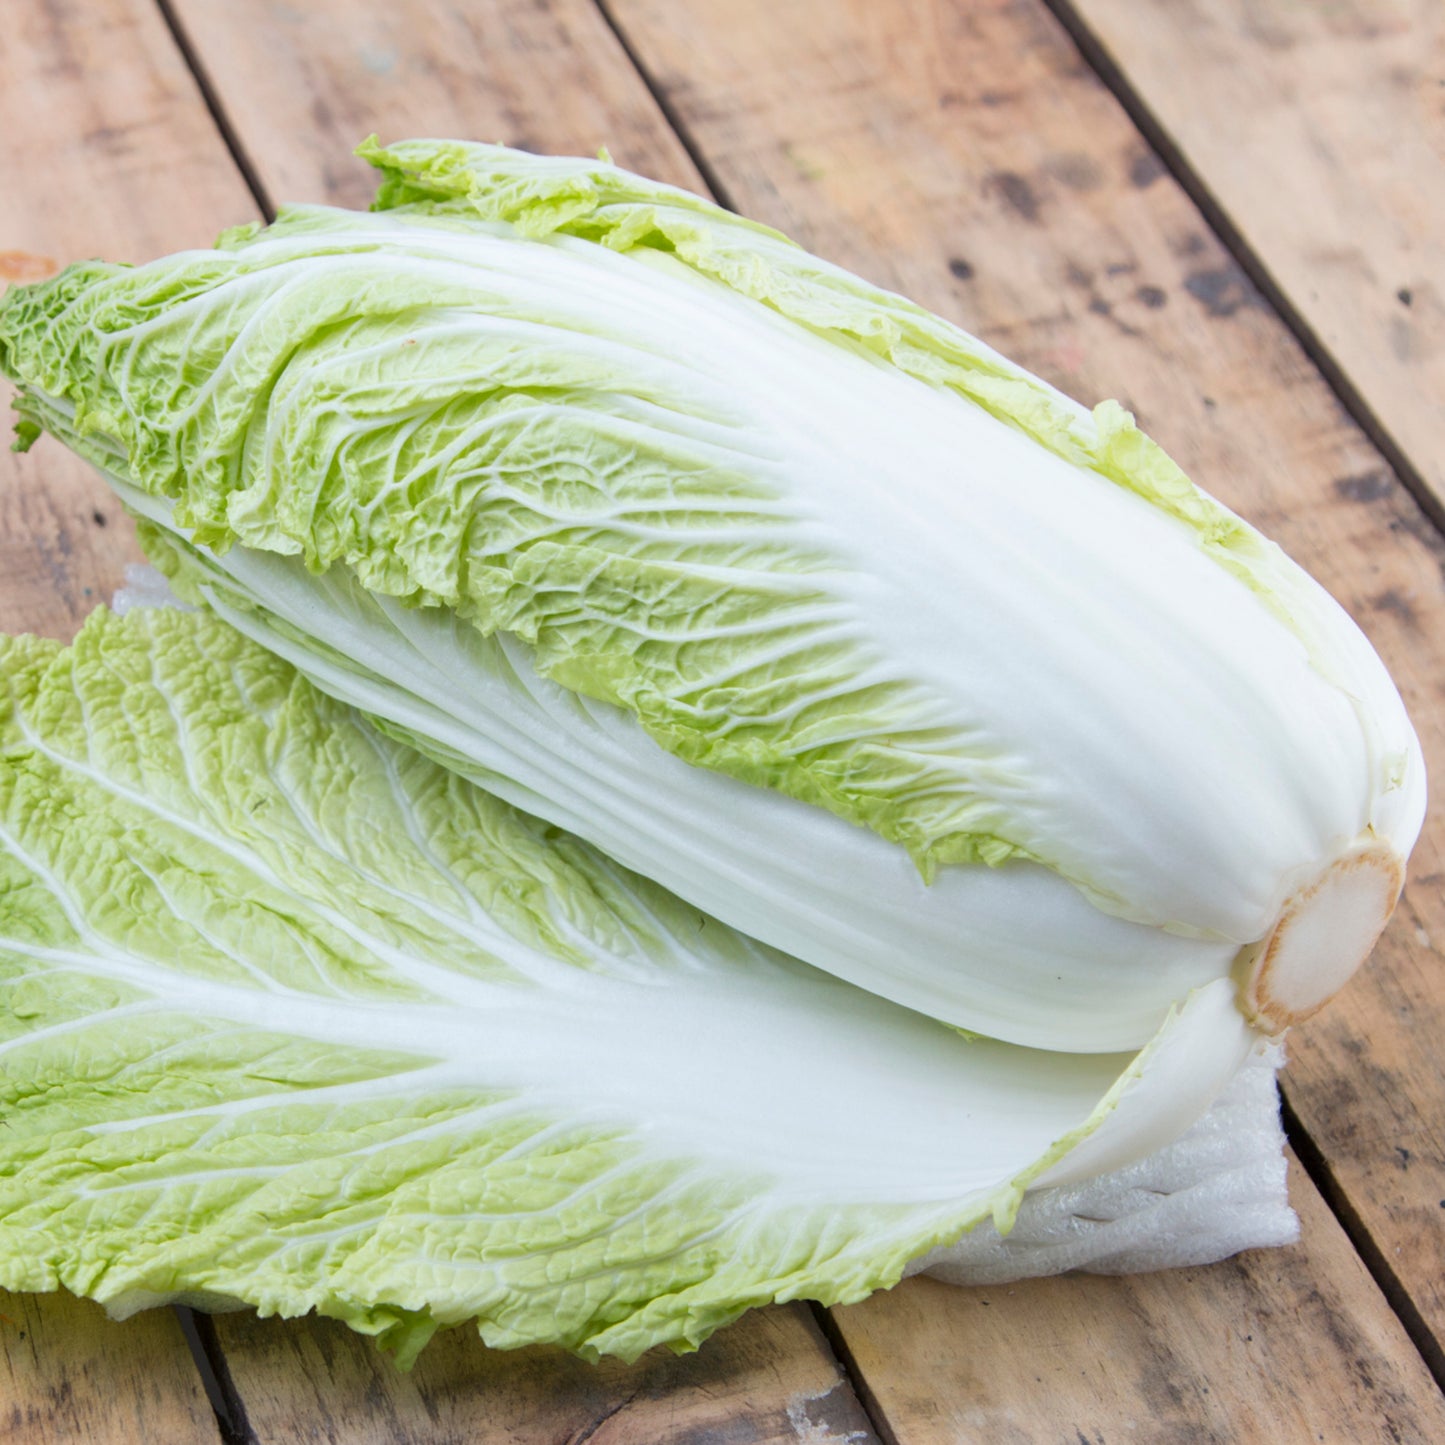 Chinese Cabbage Seeds - Organic - Non Gmo - Heirloom Seeds – Vegetable Seeds - USA Garden Seeds